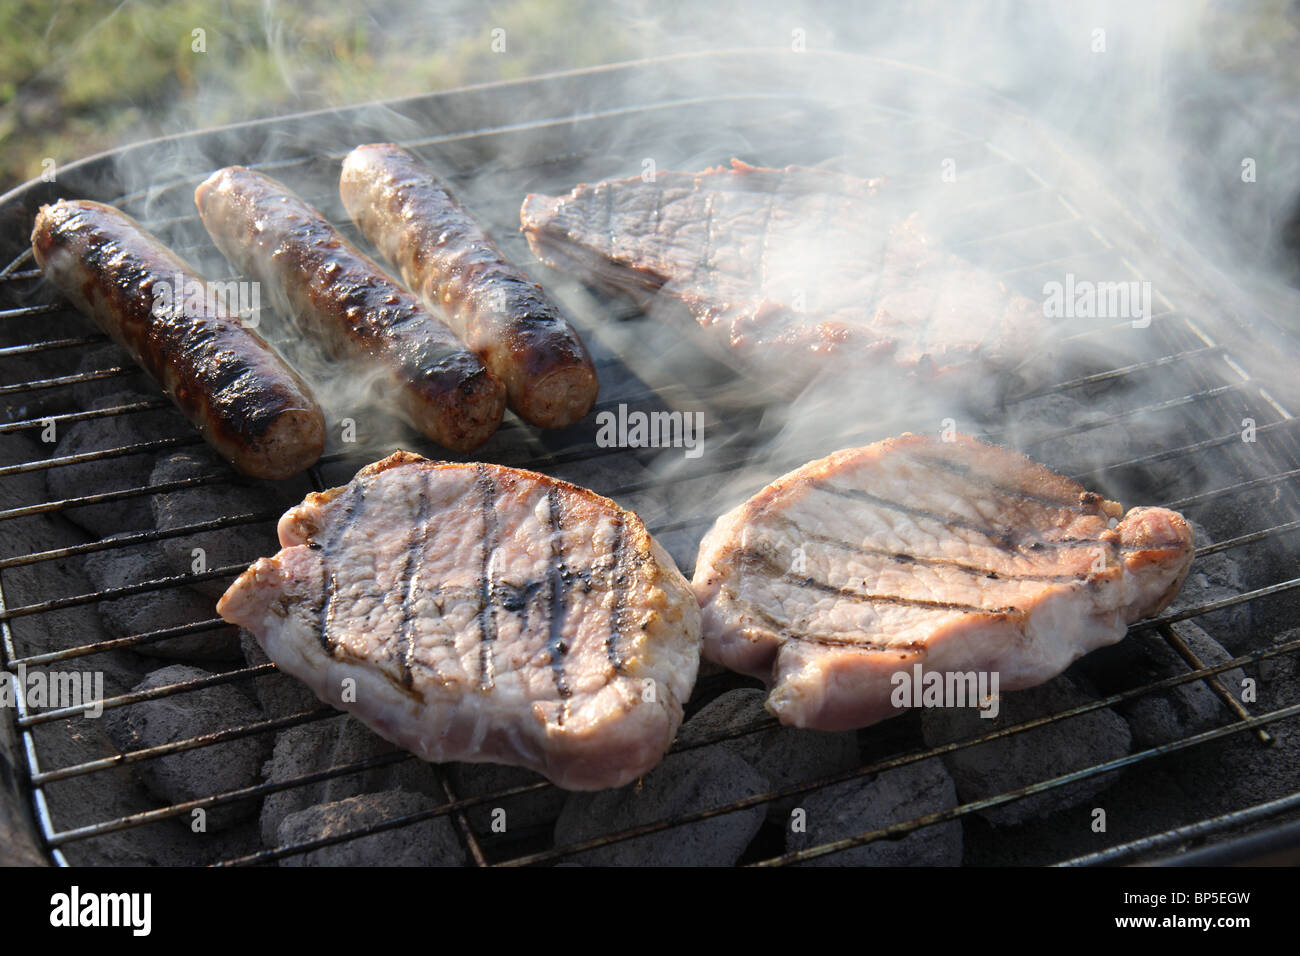 Grilled saussages and chops Stock Photo